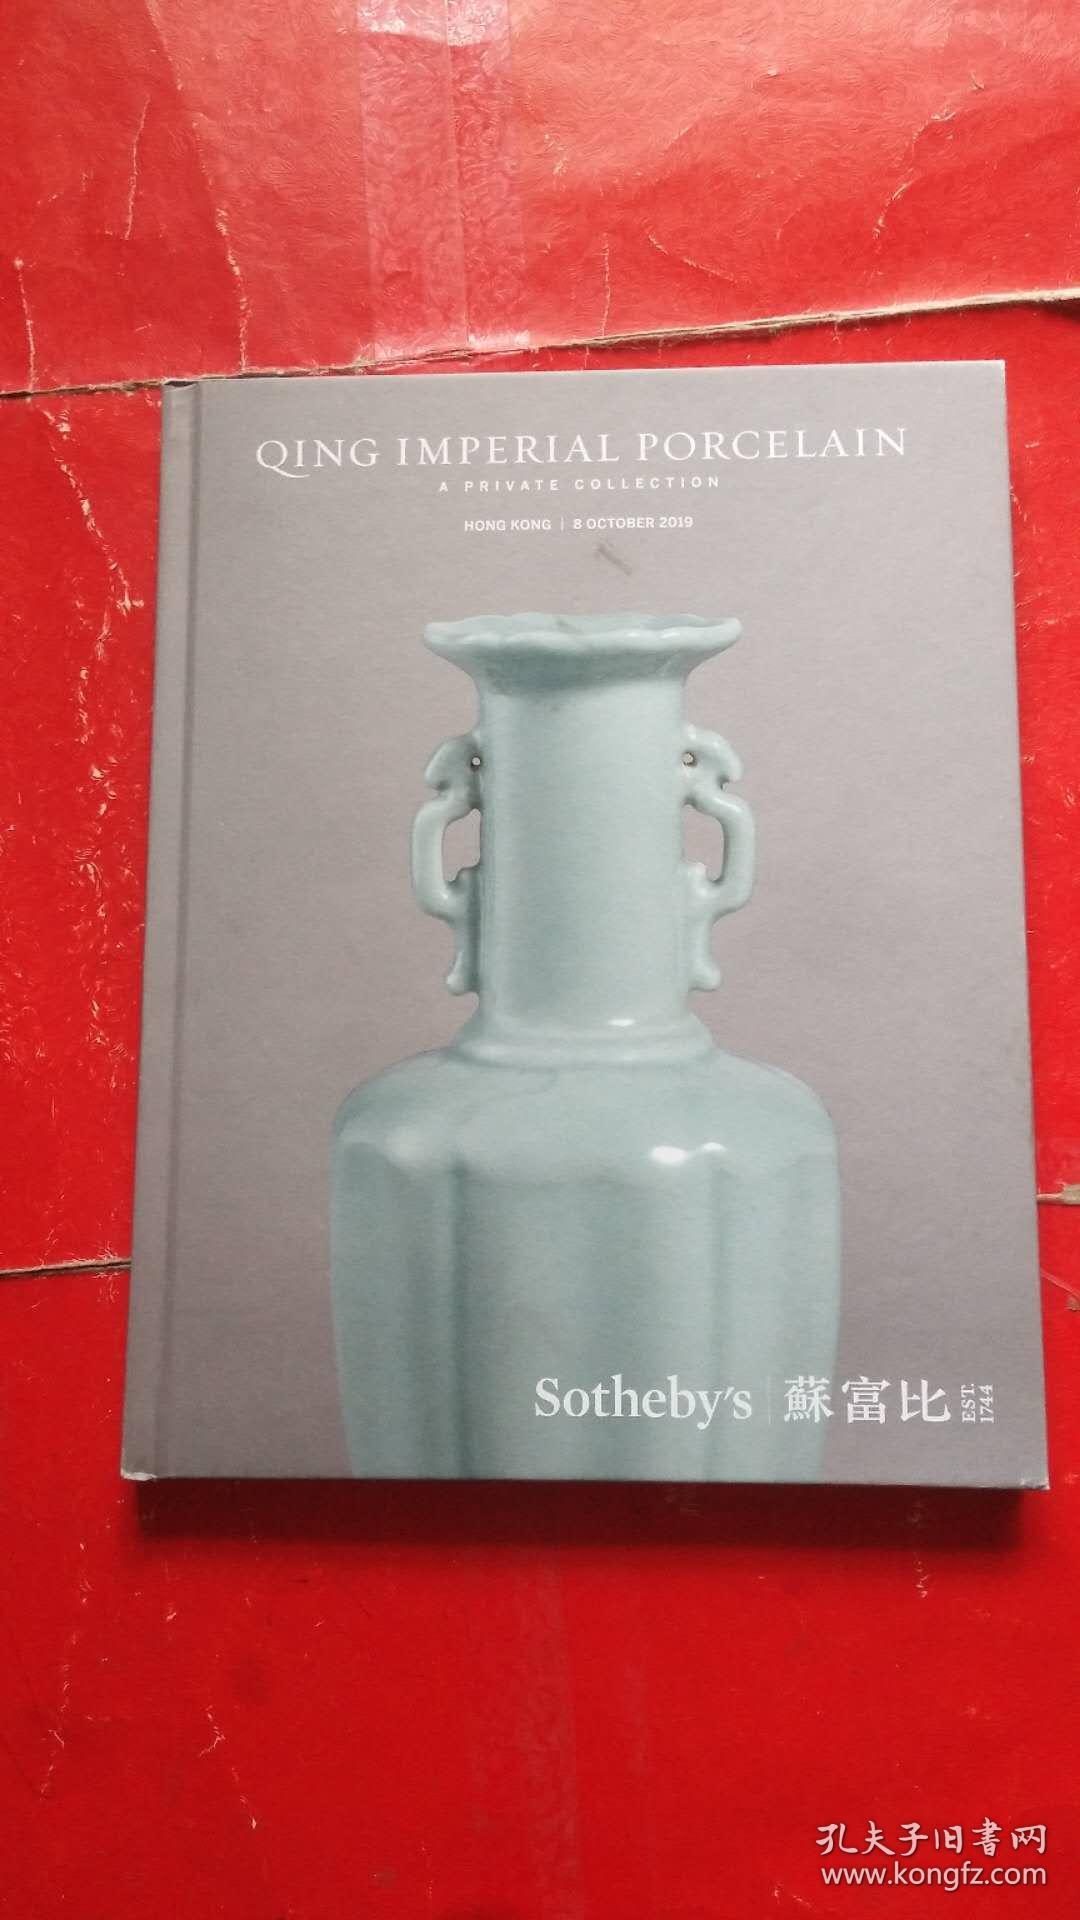 Sotheby'S 苏富比 HONG KONG QING IMPERIAL PORCELAIN 2019（硬精装）